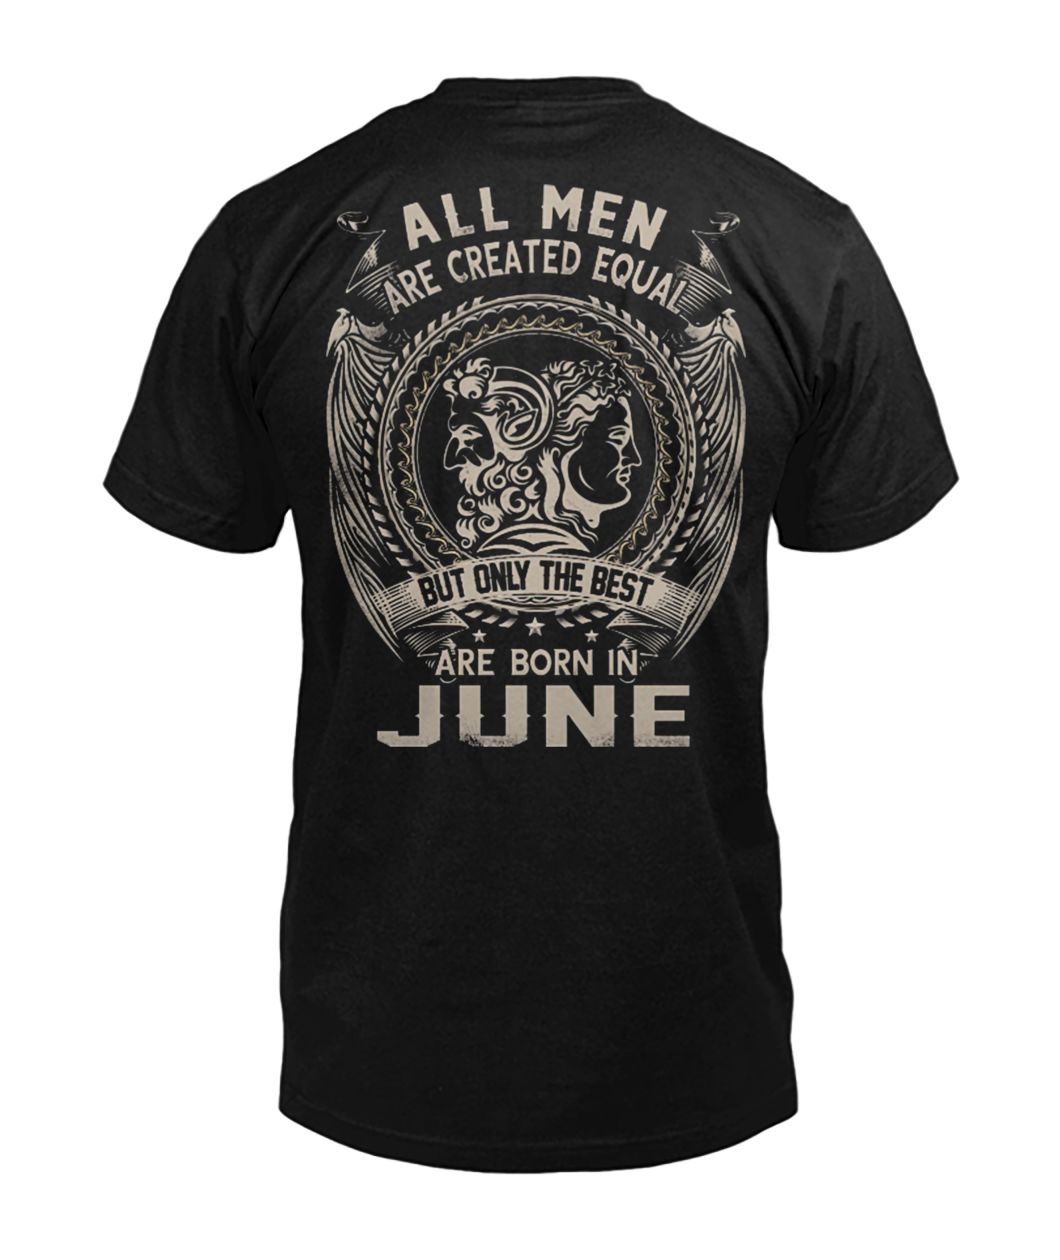 All men are created equal but only the best are born in june mens v-neck